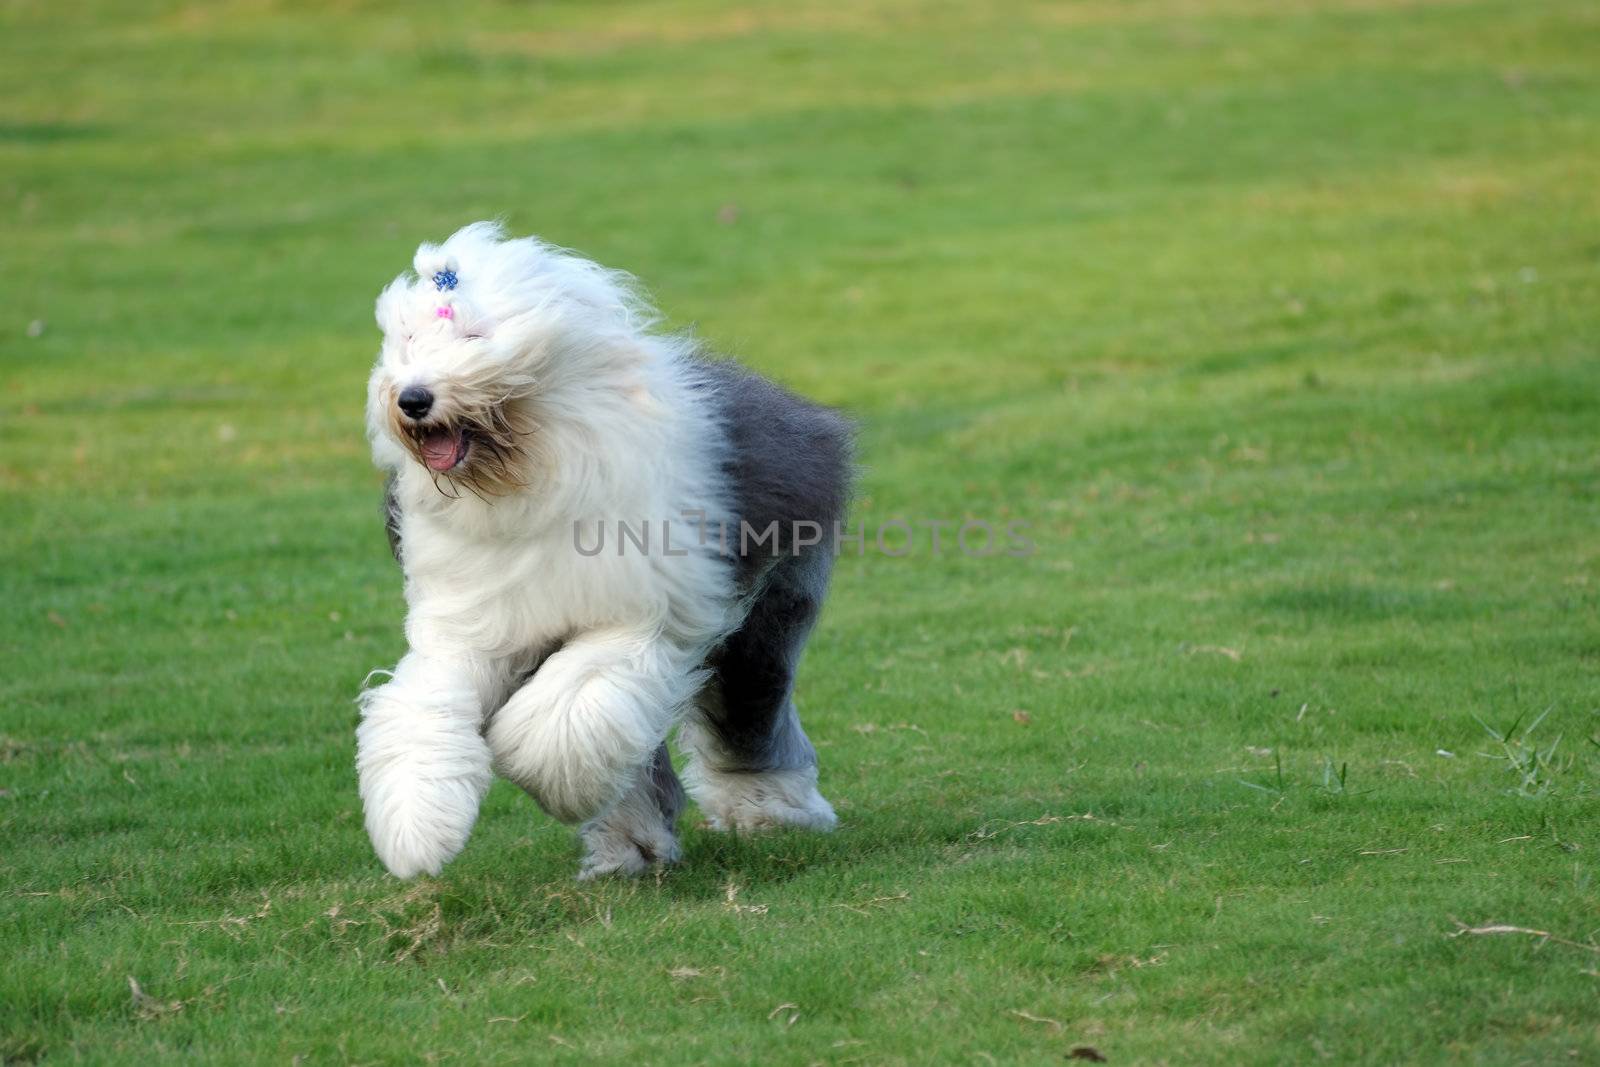 An old English sheepdog running on the lawn